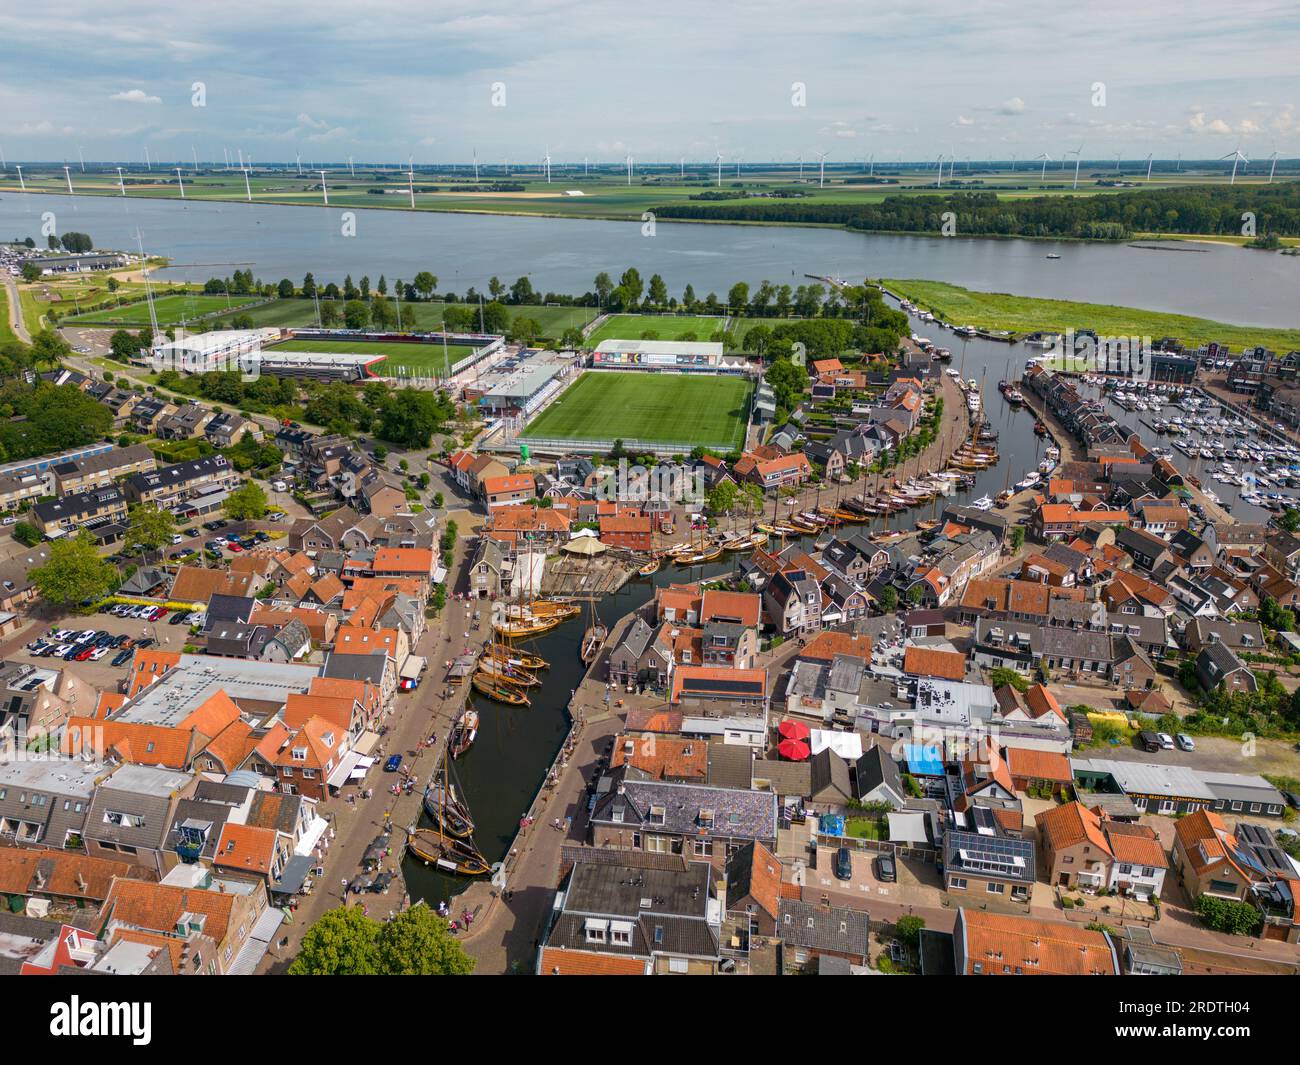 Aerial drone photo of Bunschoten and Spakenburg in the Netherlands. Spakenburg has an old town centre with a harbor and old sailing boats Stock Photo